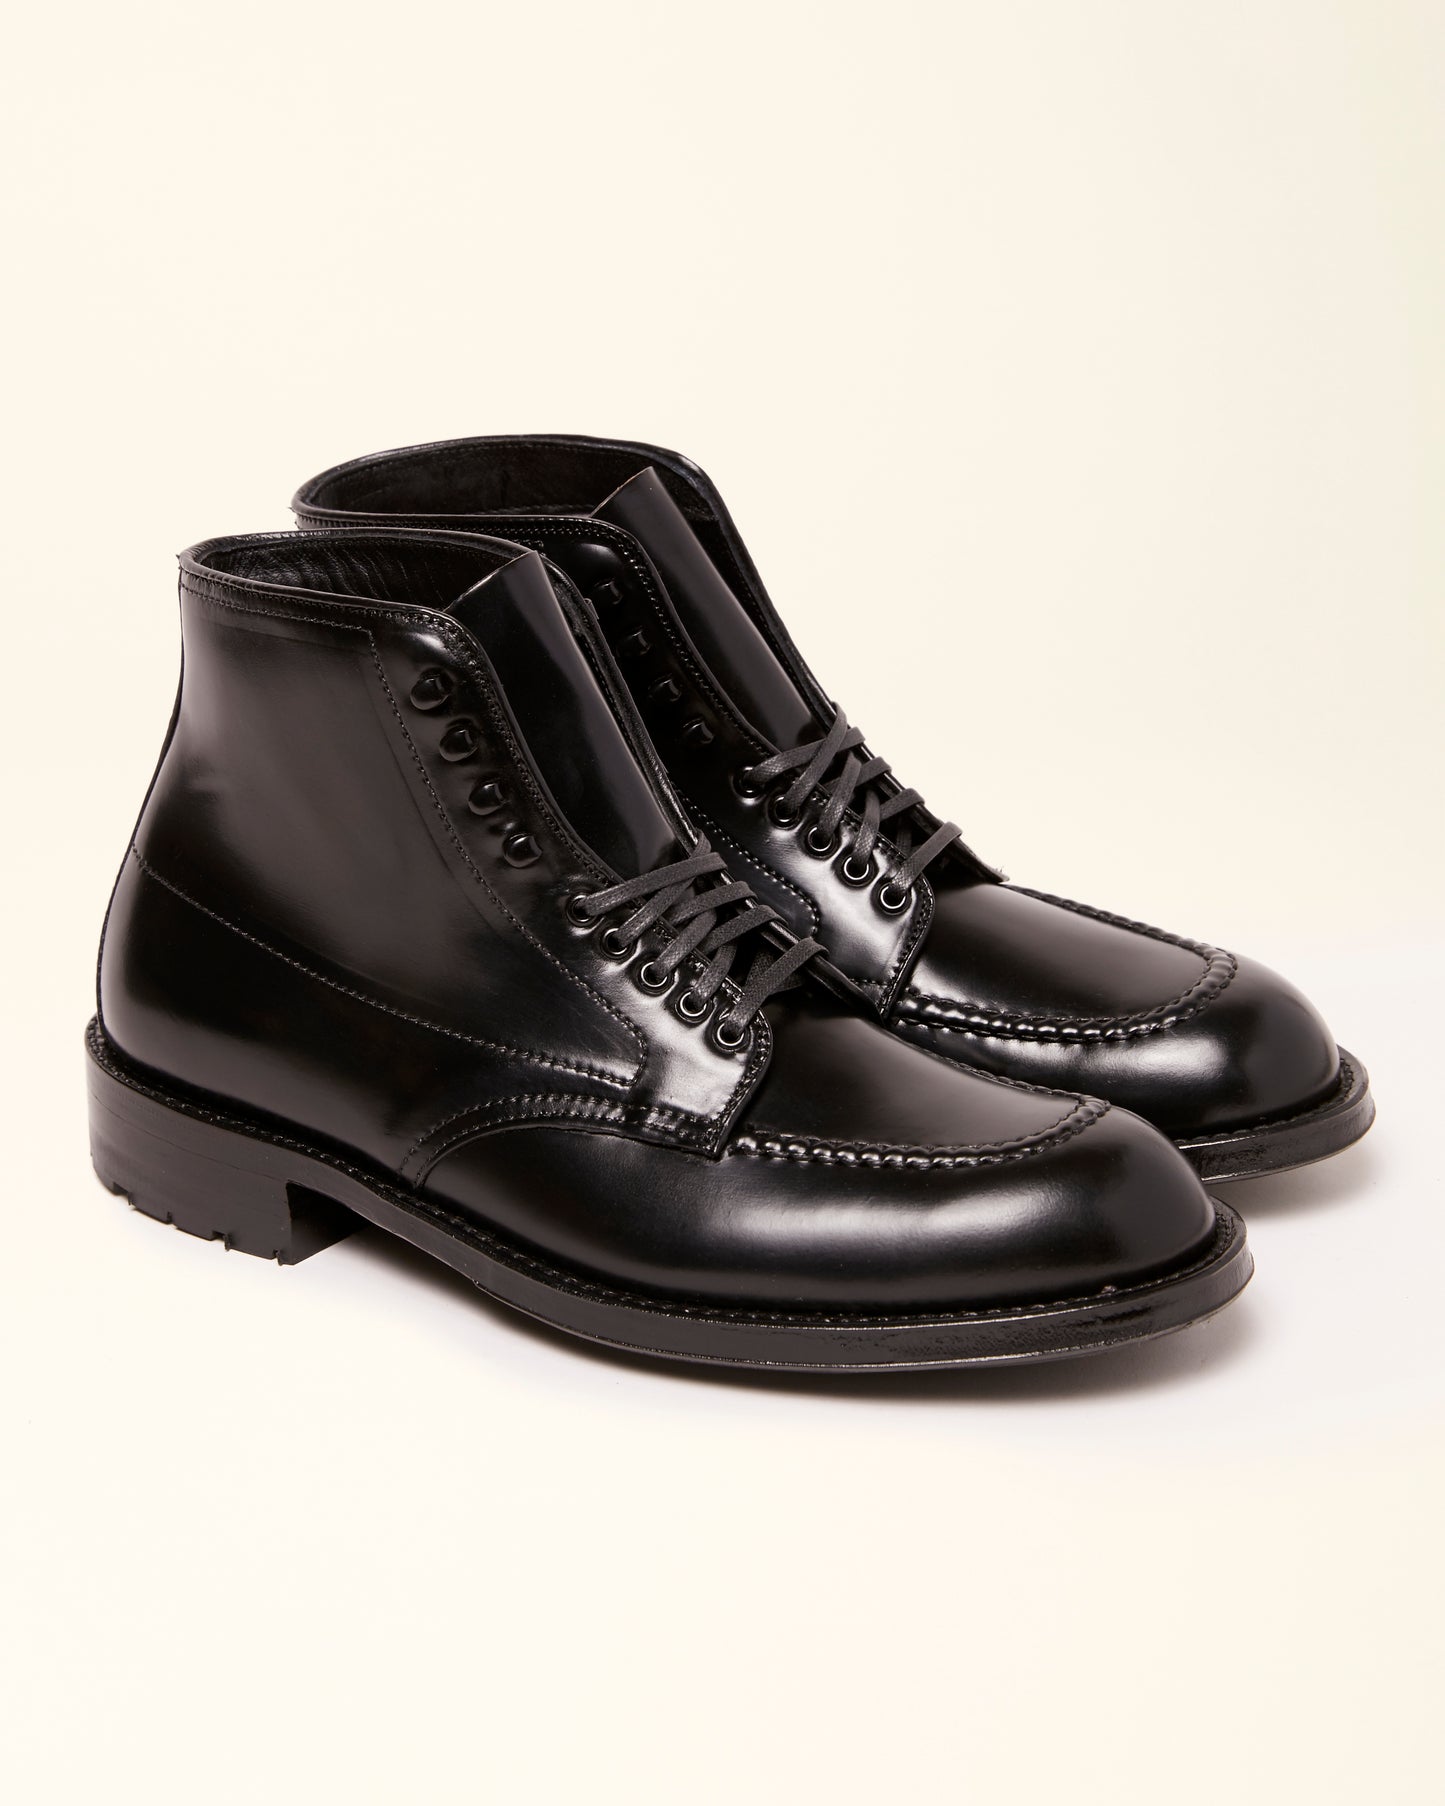 “Neptune” Black Shell Cordovan Handsewn Indy Boot